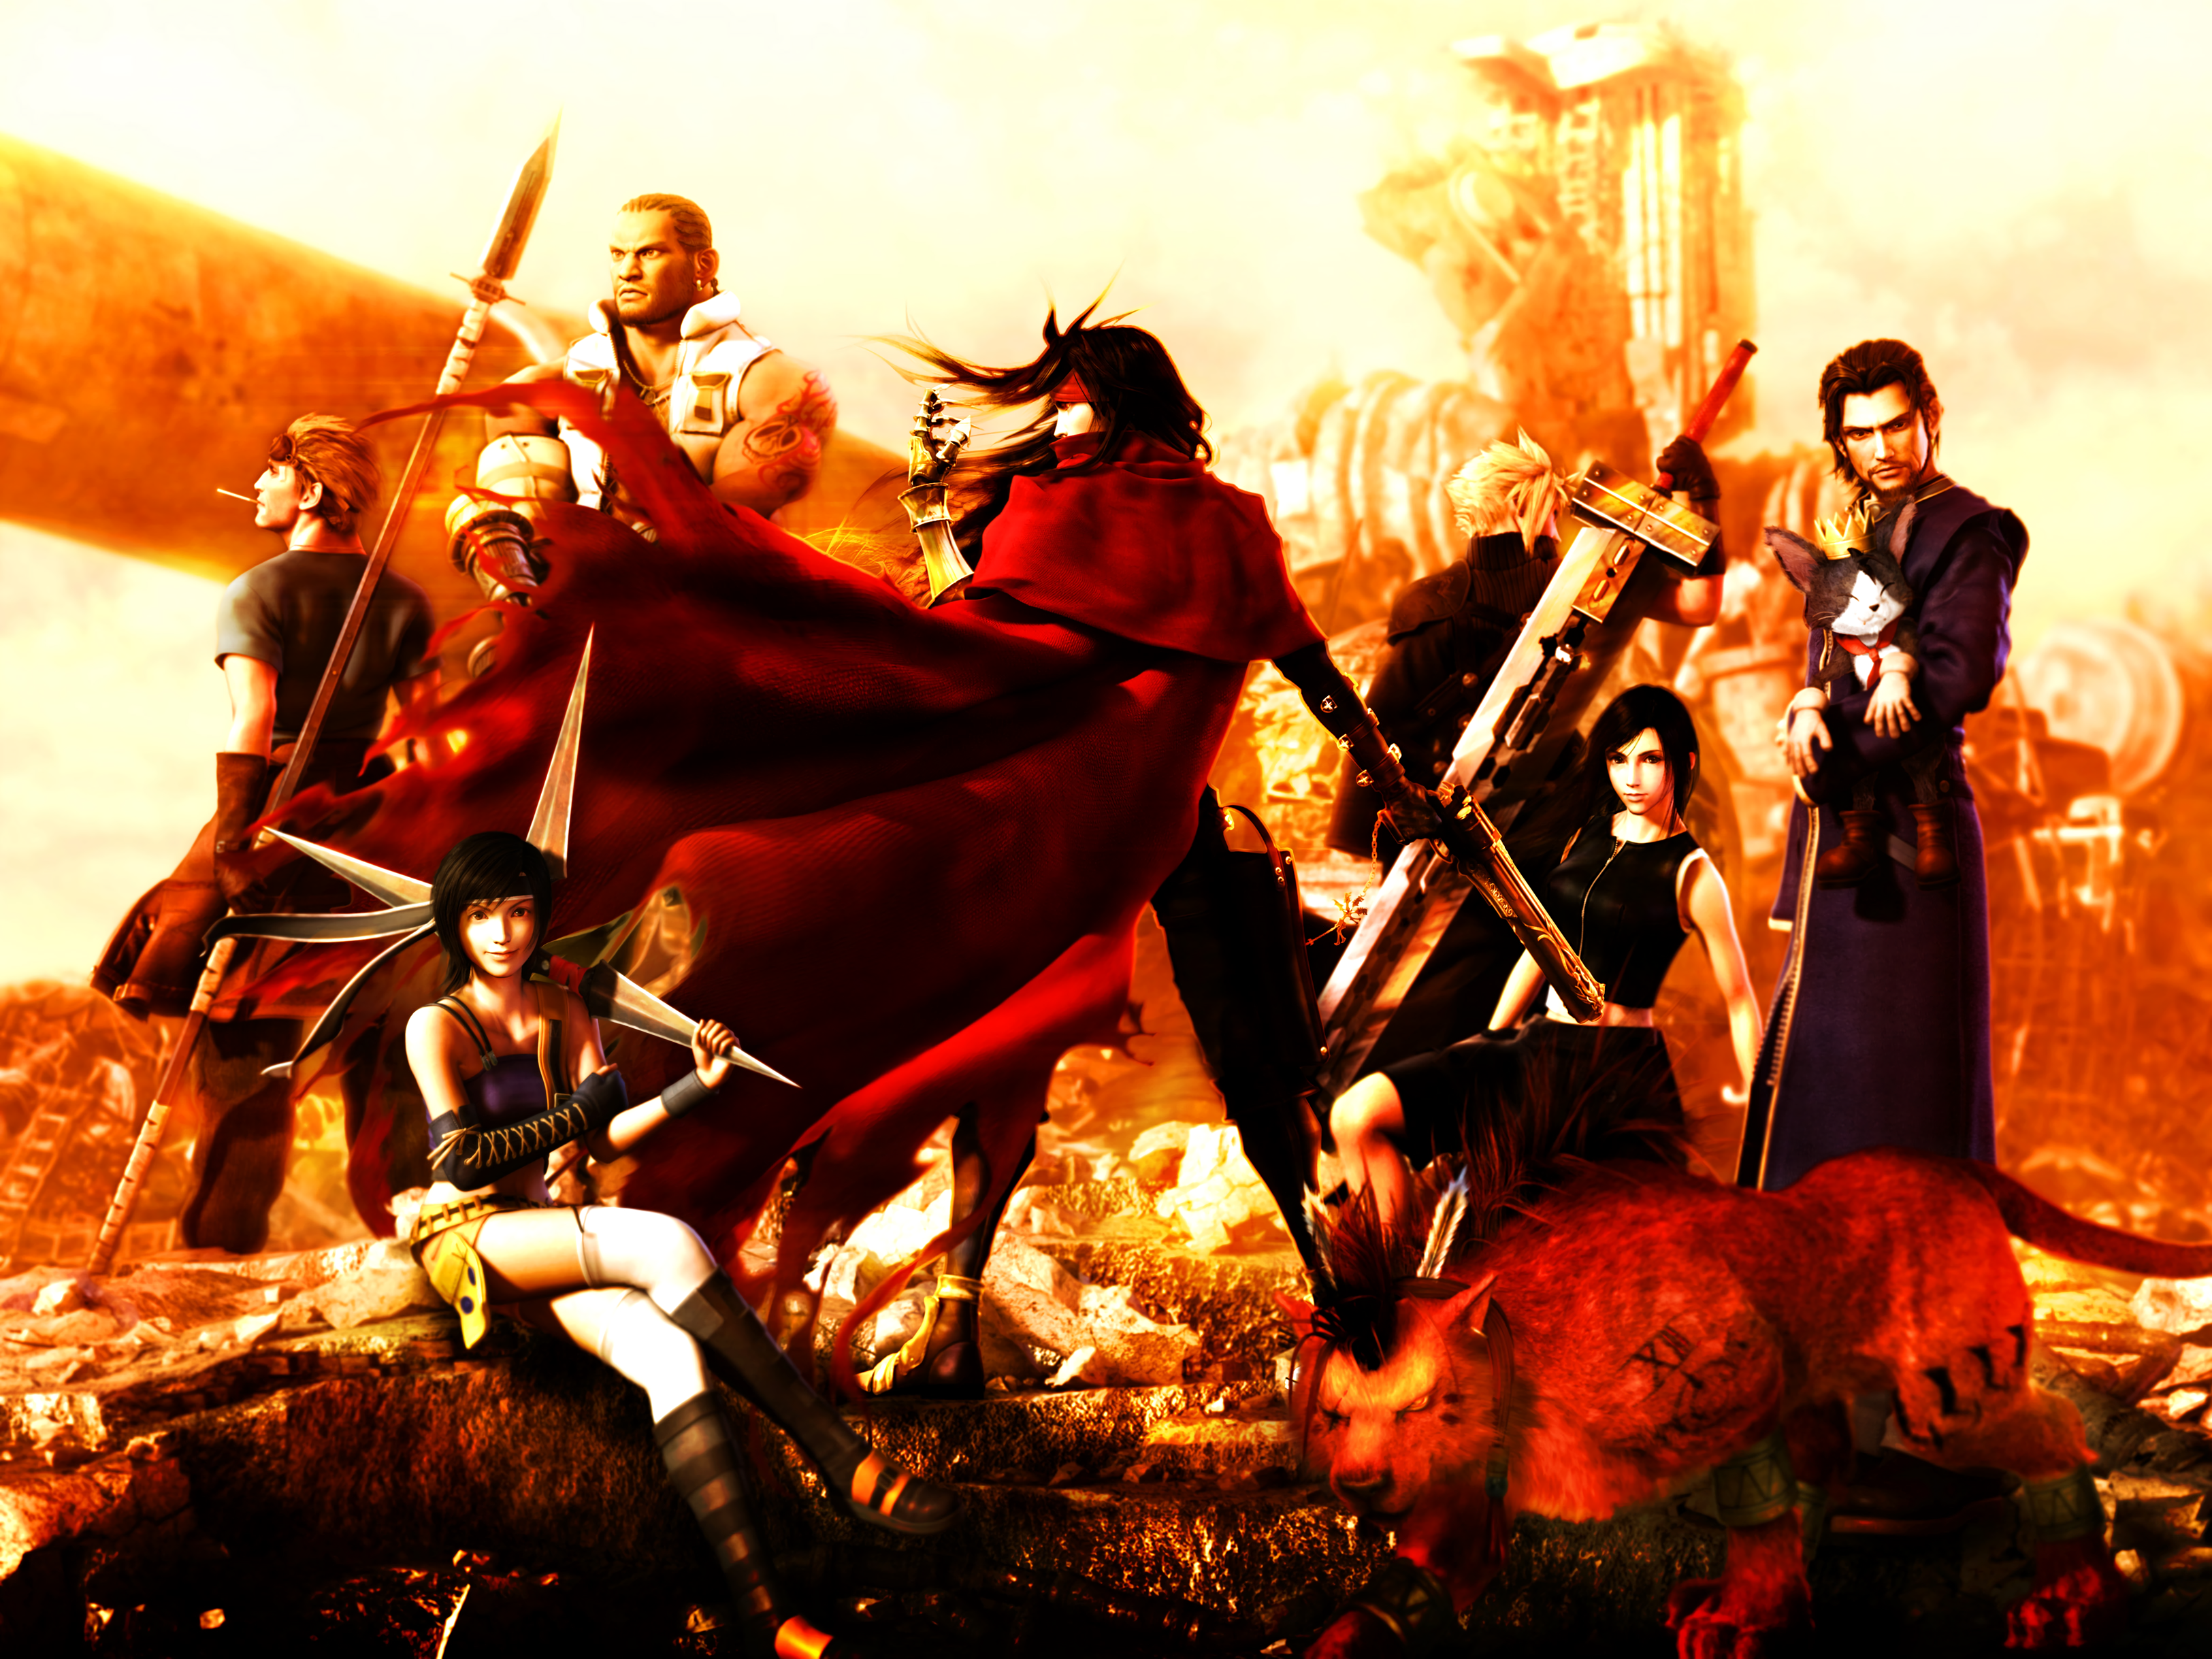 A group of characters from Dirge of Cerberus: Final Fantasy VII gathered together as a powerful team.